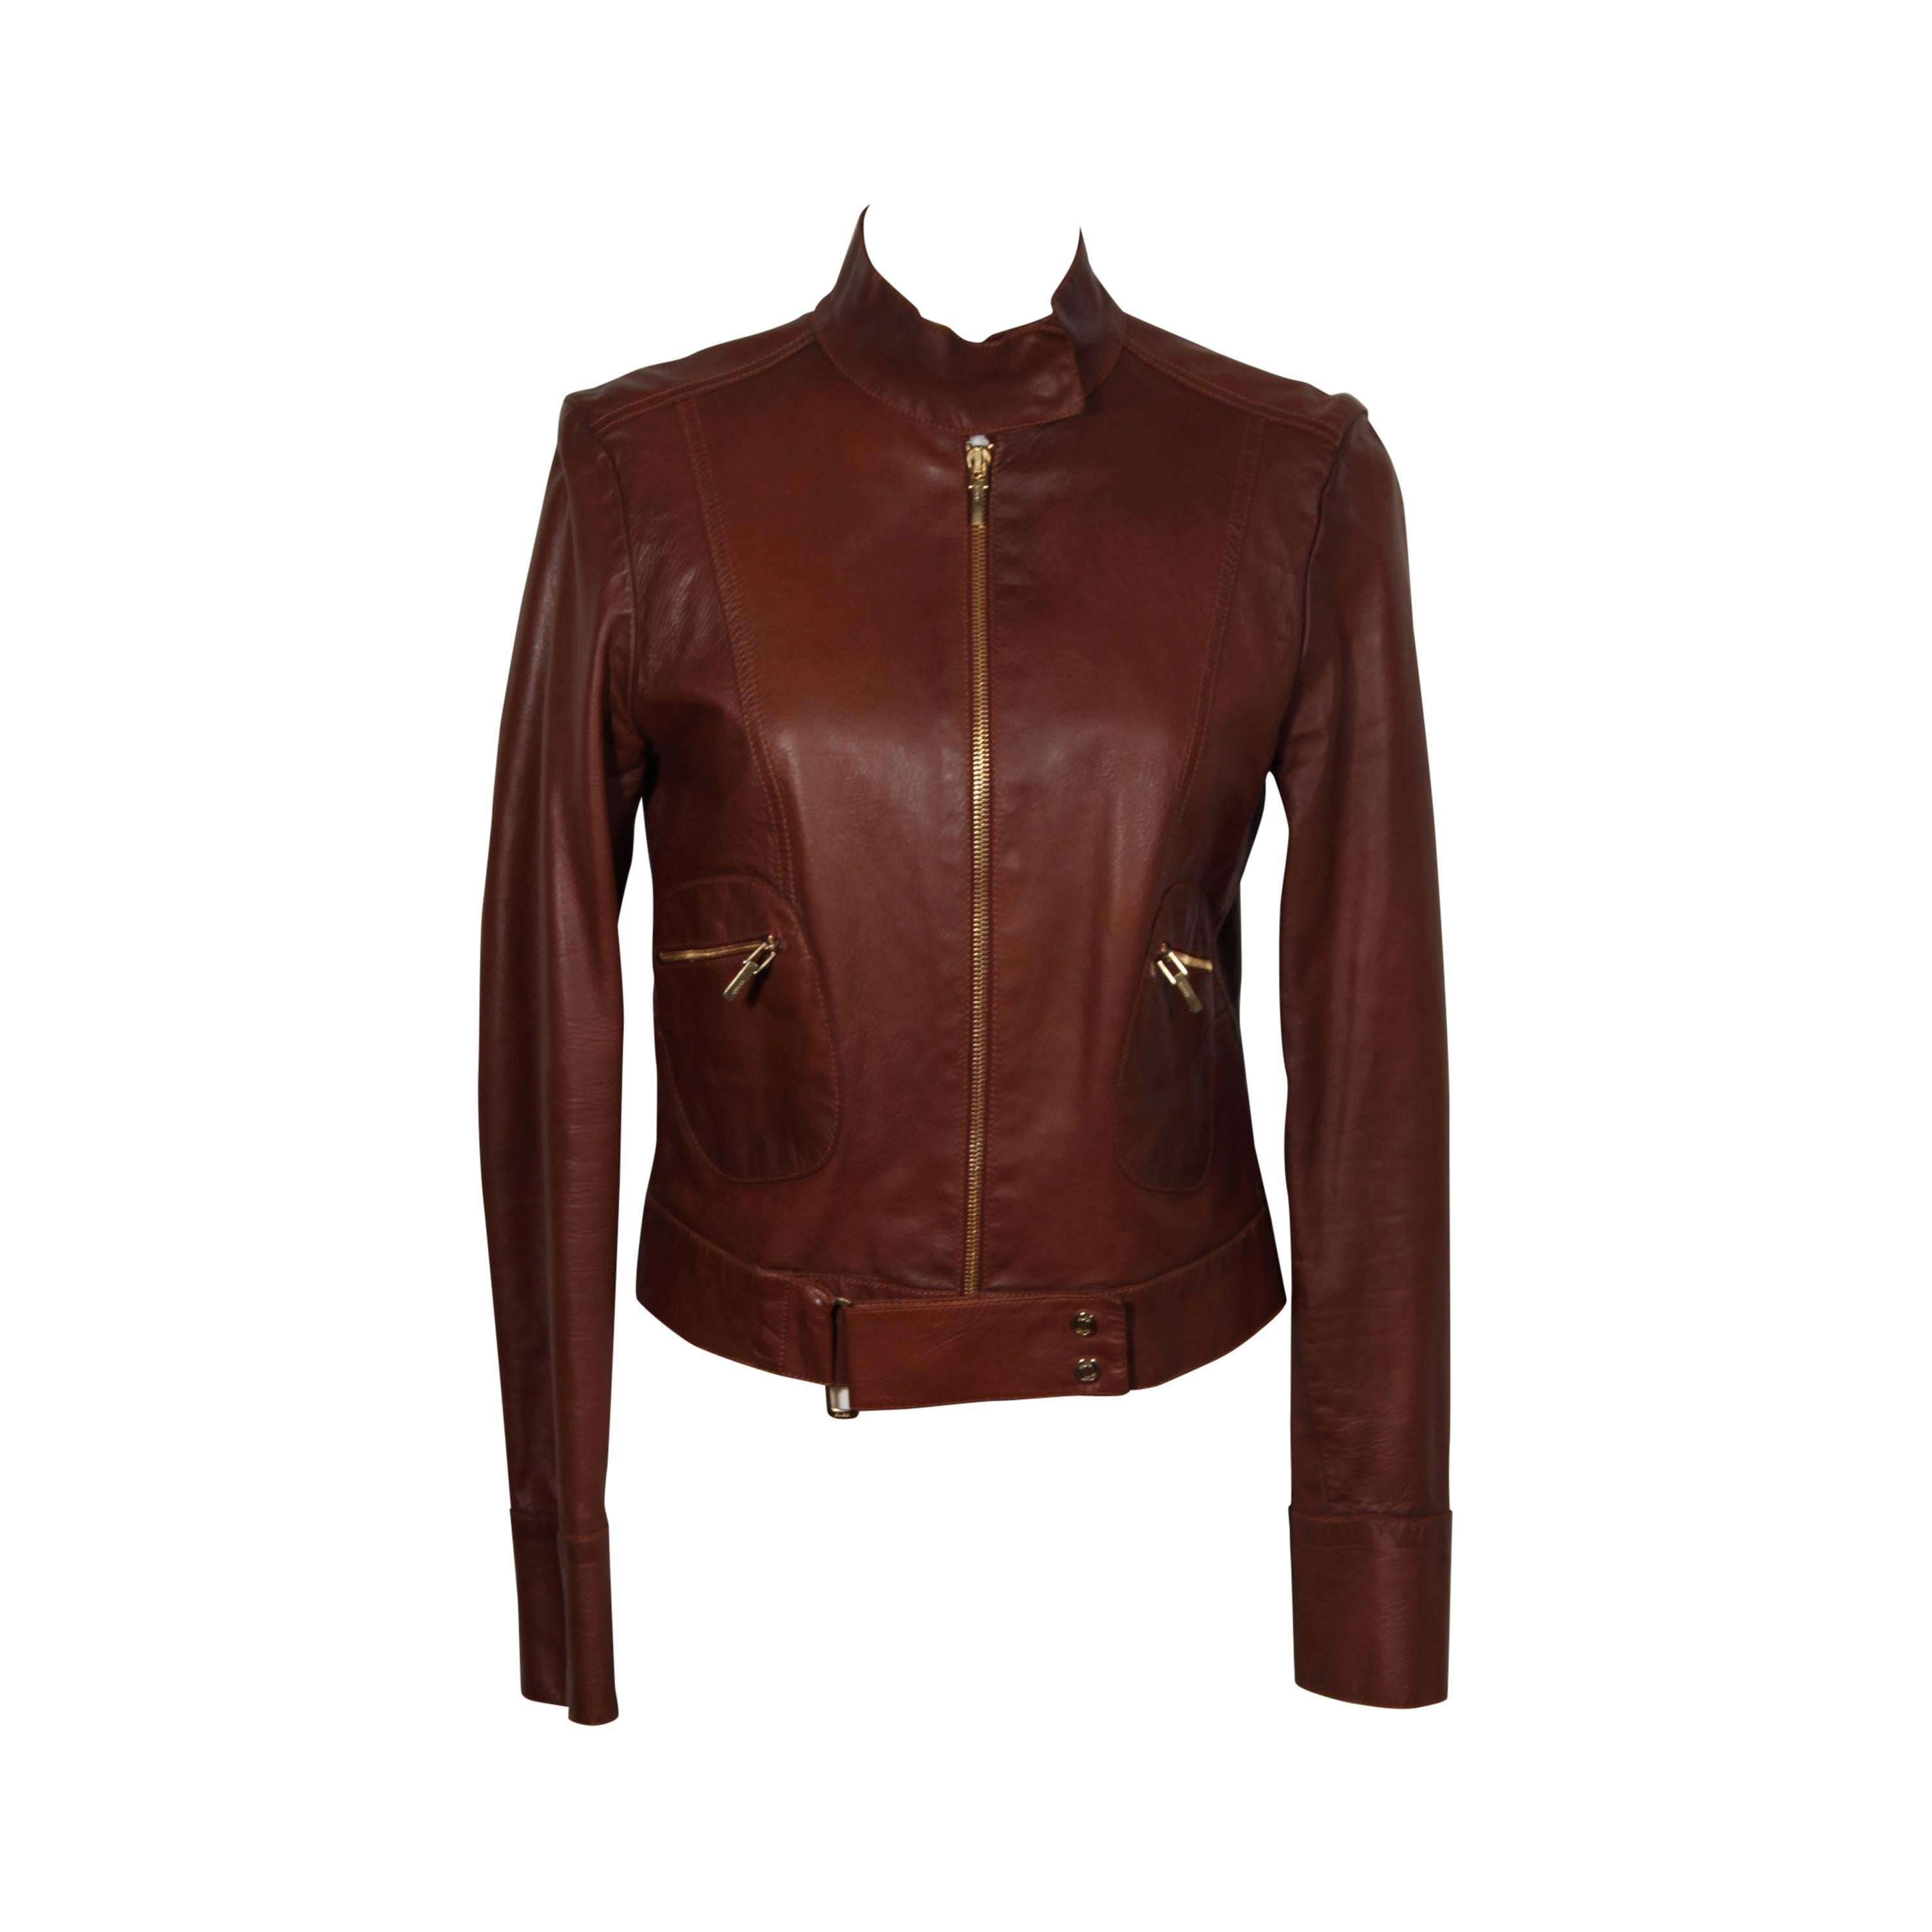 GUCCI TOM FORD Brown LEATHER Biker JACKET Zip Front Sz 40